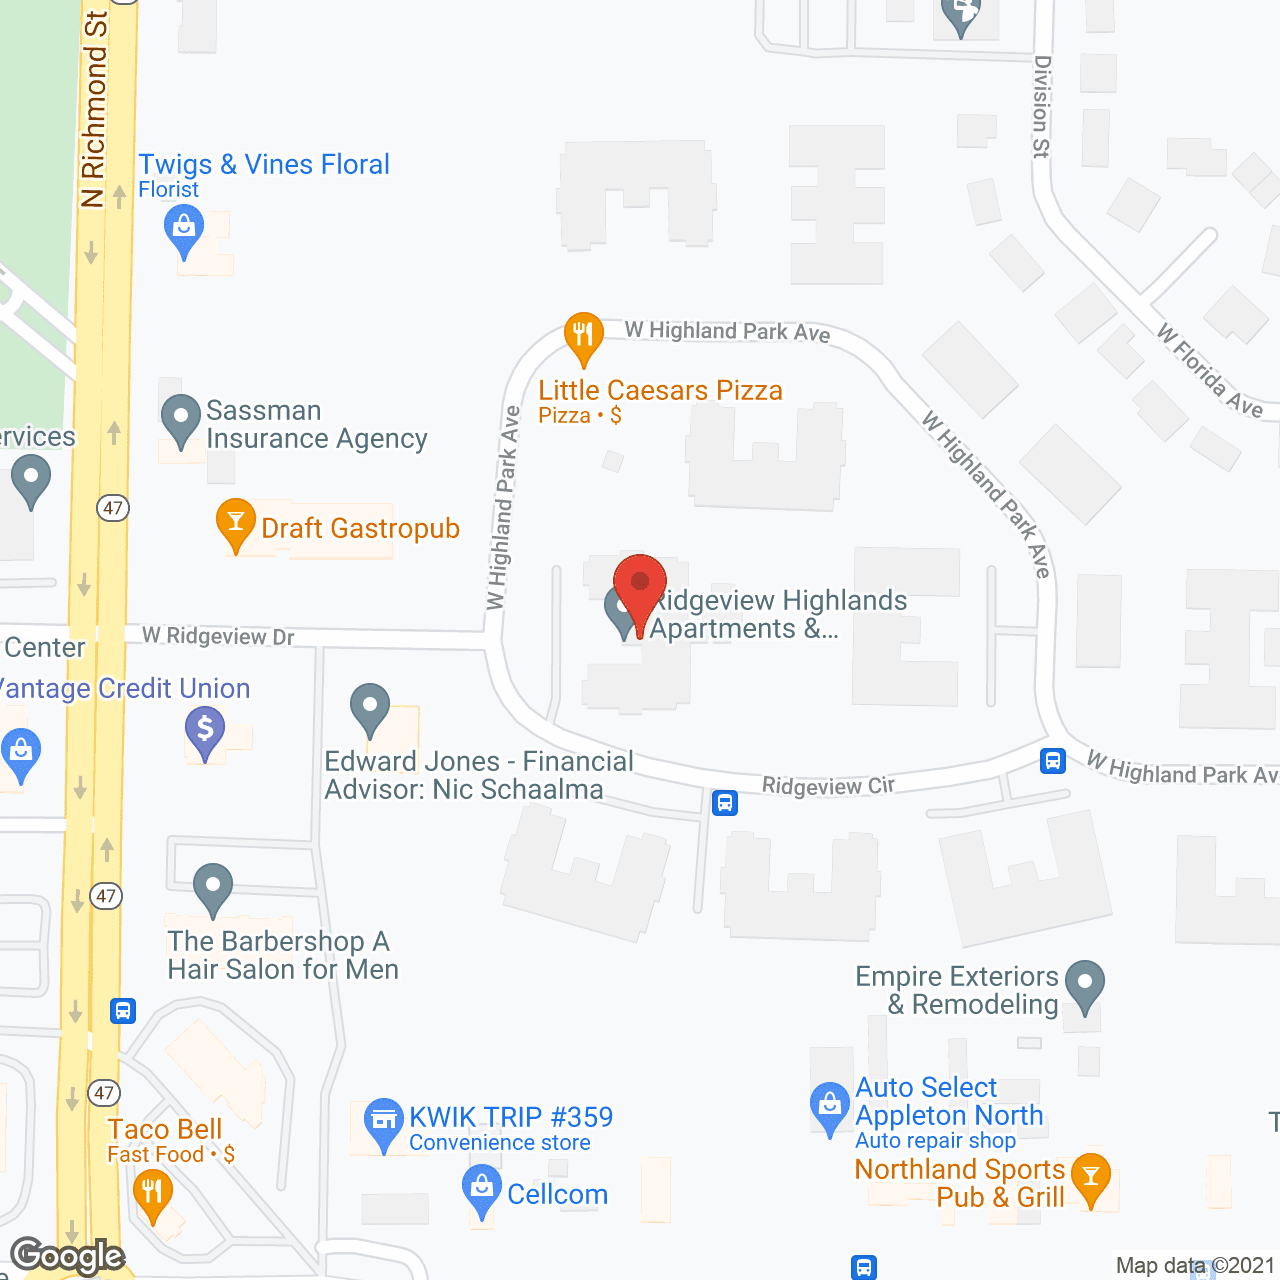 Ridgeview Highlands Apartments 55+ in google map